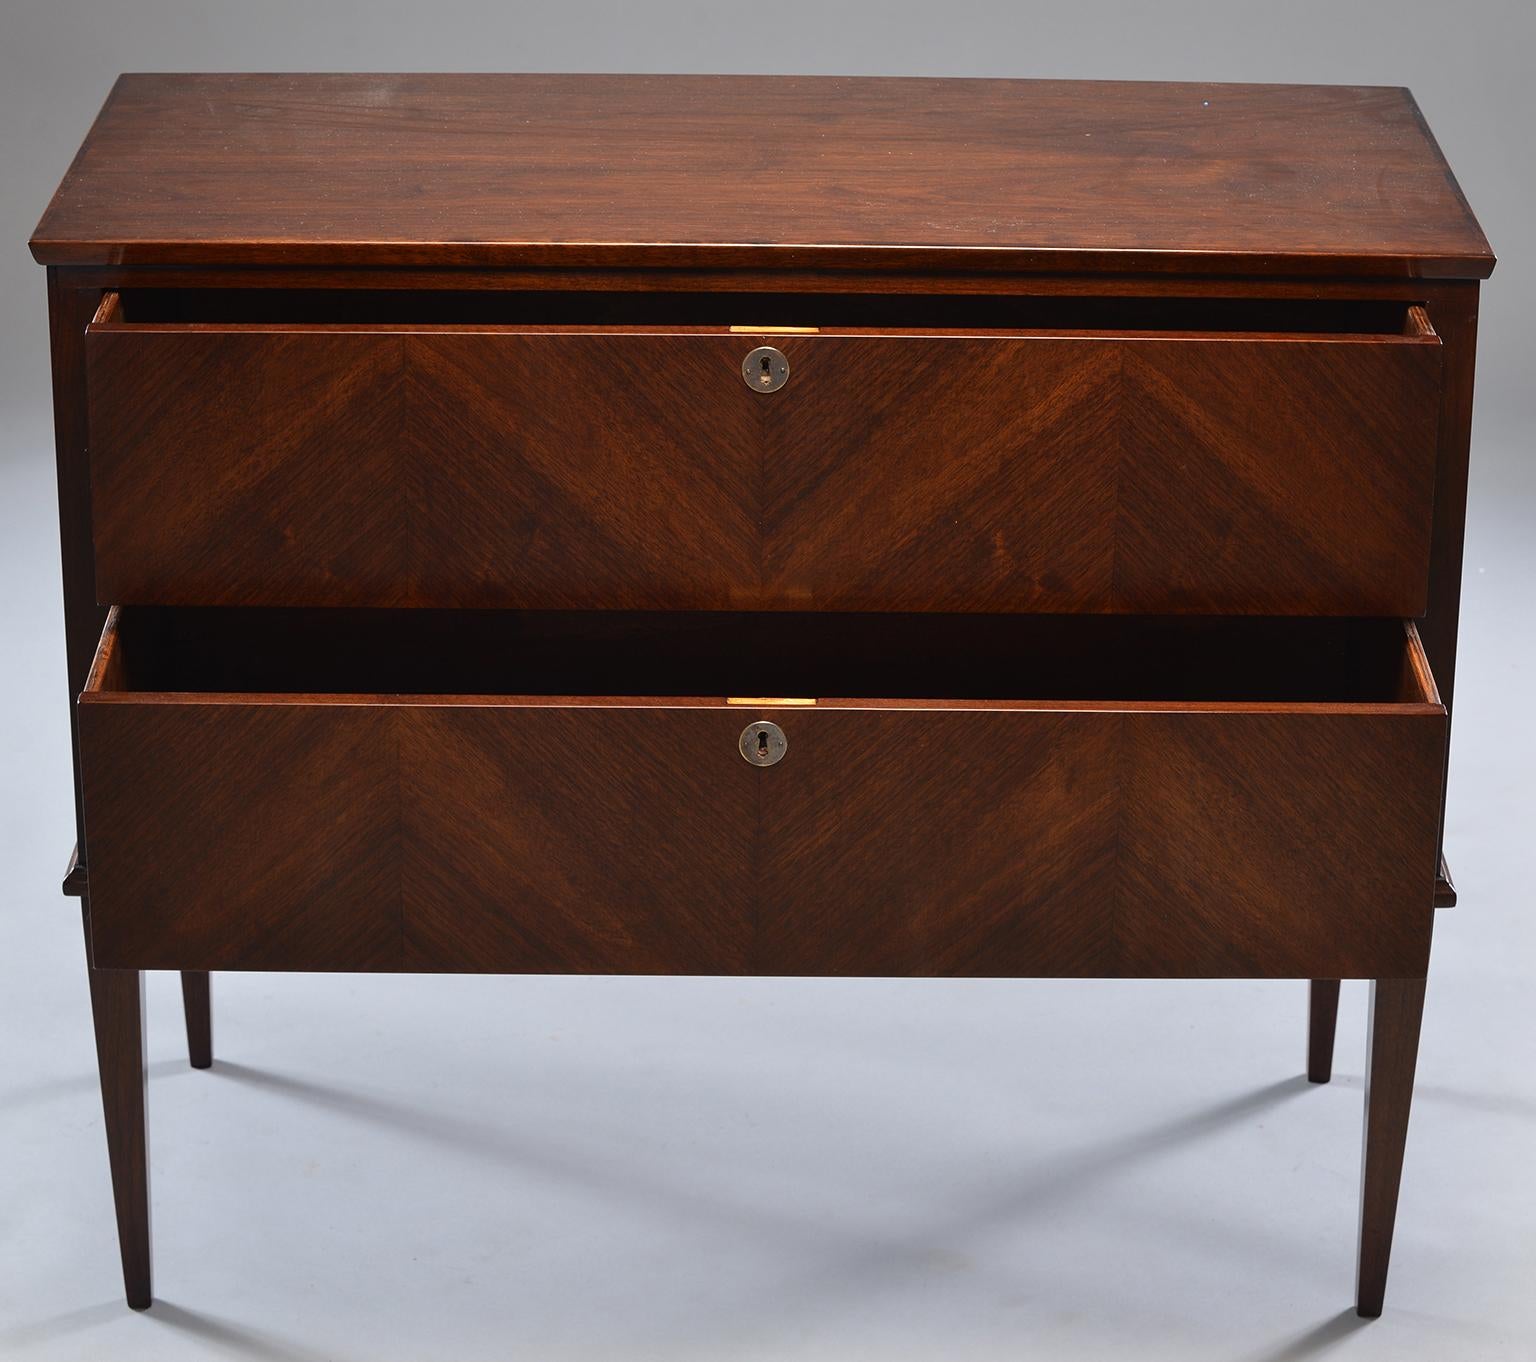 This pair of walnut Empire style chests was custom-made by an English cabinet maker. Each chest has two functional locking drawers. Drawer fronts have decorative pattern formed by placement of veneer so that graining / wood figuring forms chevron